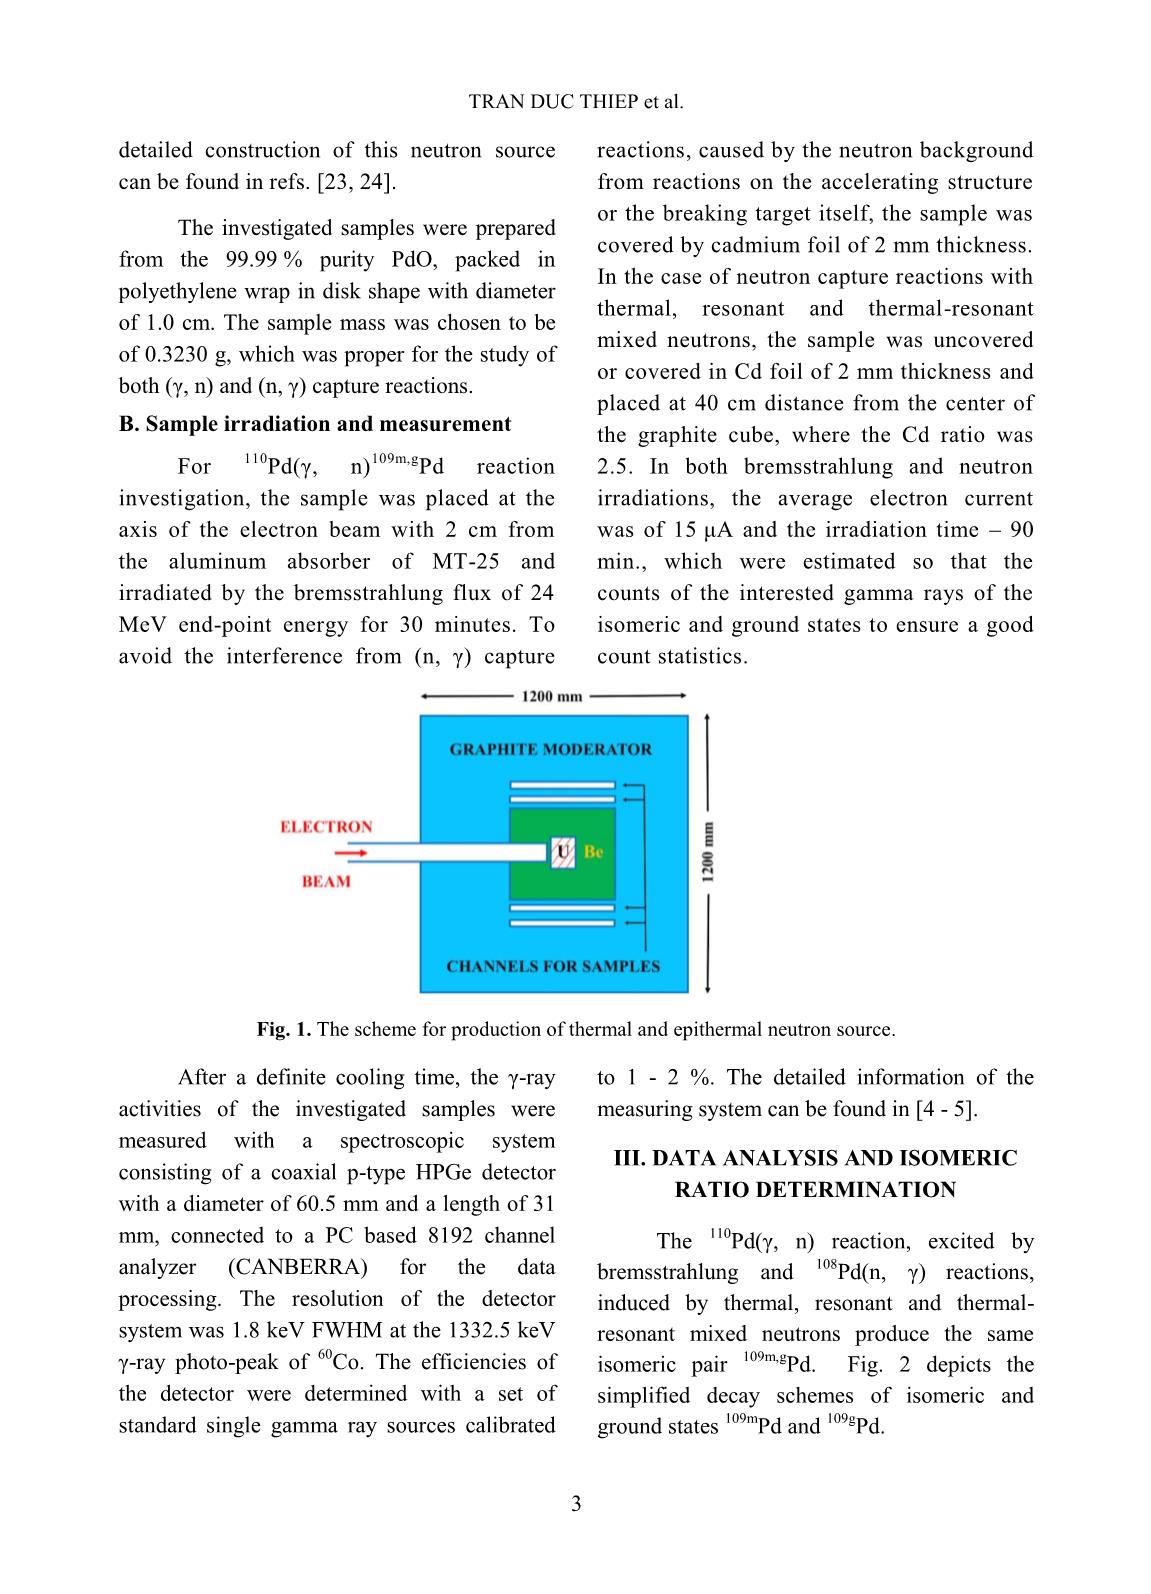 Nuclear Science and Technology - Volume 10, Number 1, March 2020 trang 6